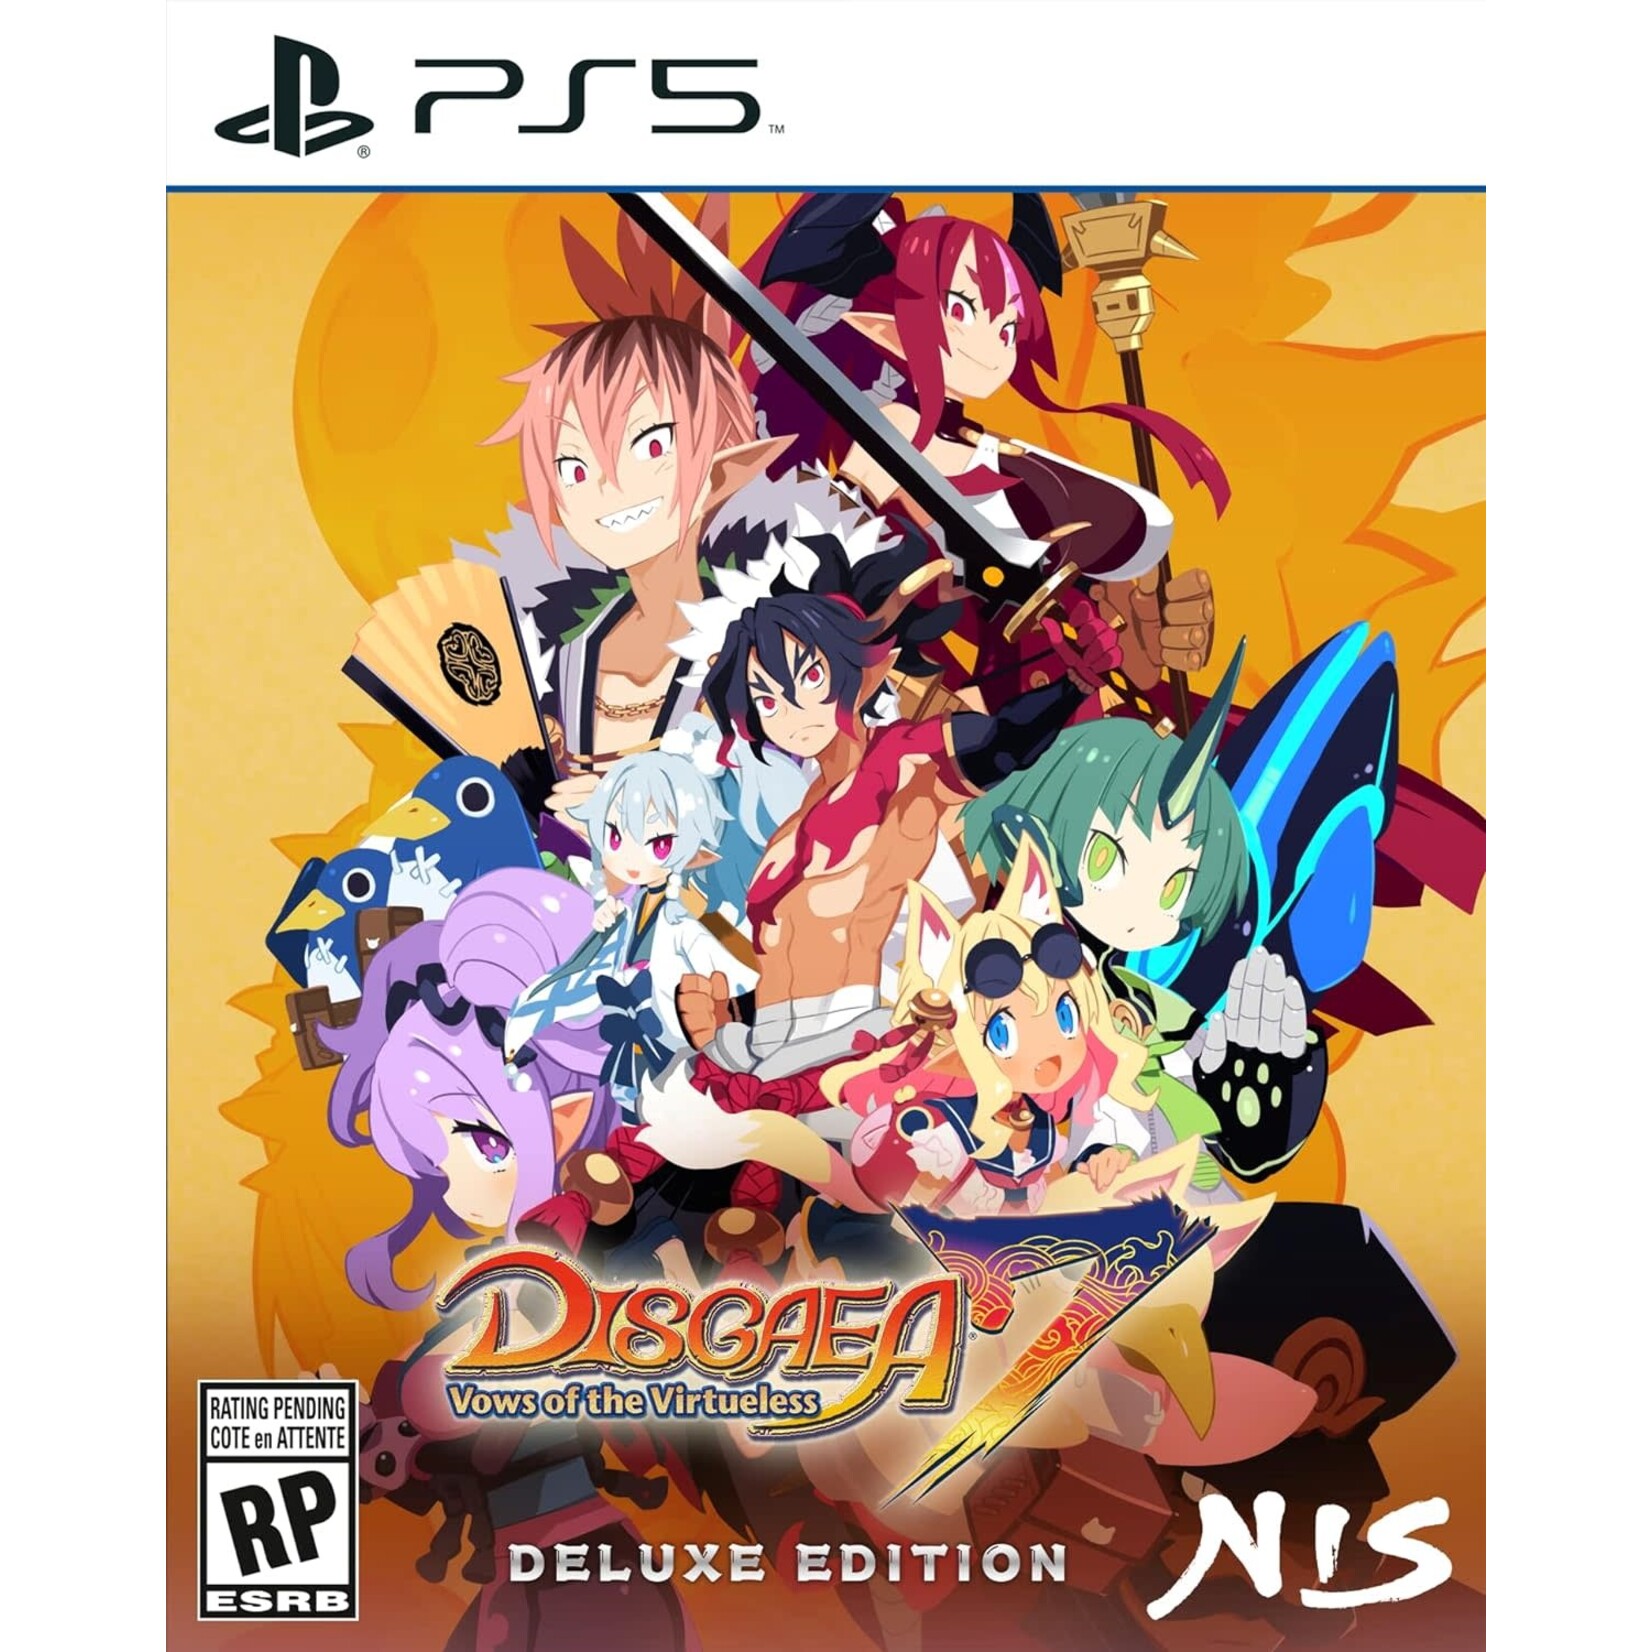 PS5-Disgaea 7 Vows of the Virtueless